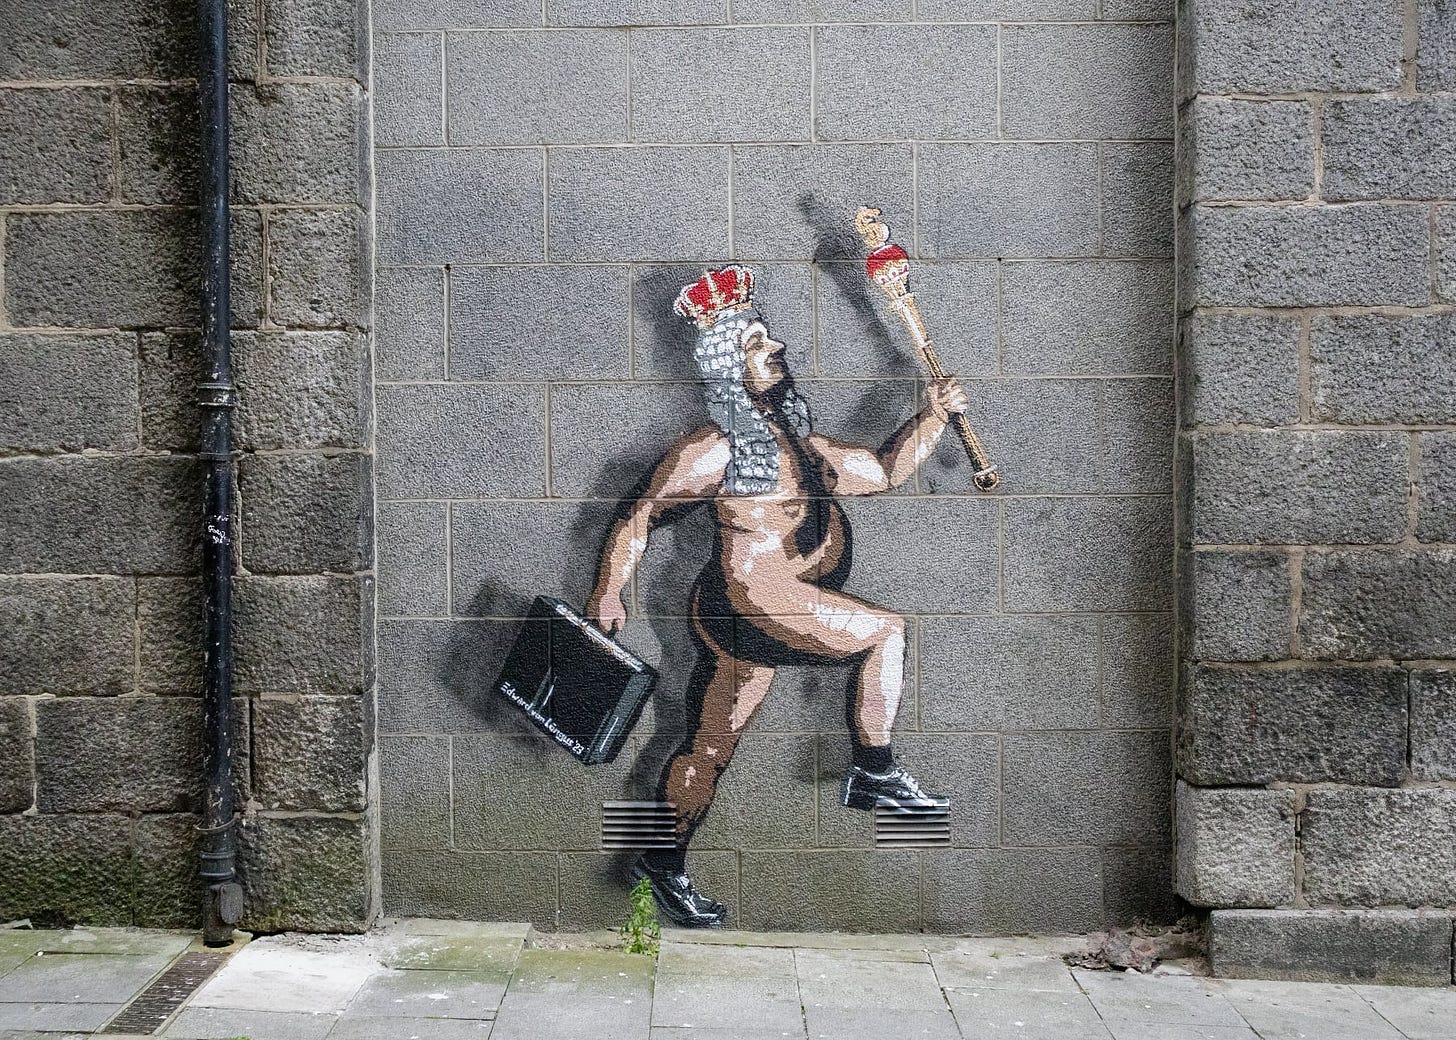 This image captures a piece of street art by Edward von Lõngus titled 'The Naked Emperor'. The artwork, spray-painted on a grey urban wall, depicts a figure resembling a traditional emperor, but humorously presented without clothes. The character has a long beard, a red crown, and holds a sceptre aloft. Instead of regal attire, the emperor sports black shoes with thick soles. The figure appears to be stepping off a pair of black blocks, giving the impression of motion. A drainpipe bisects the image, adding to the urban feel of the scene.